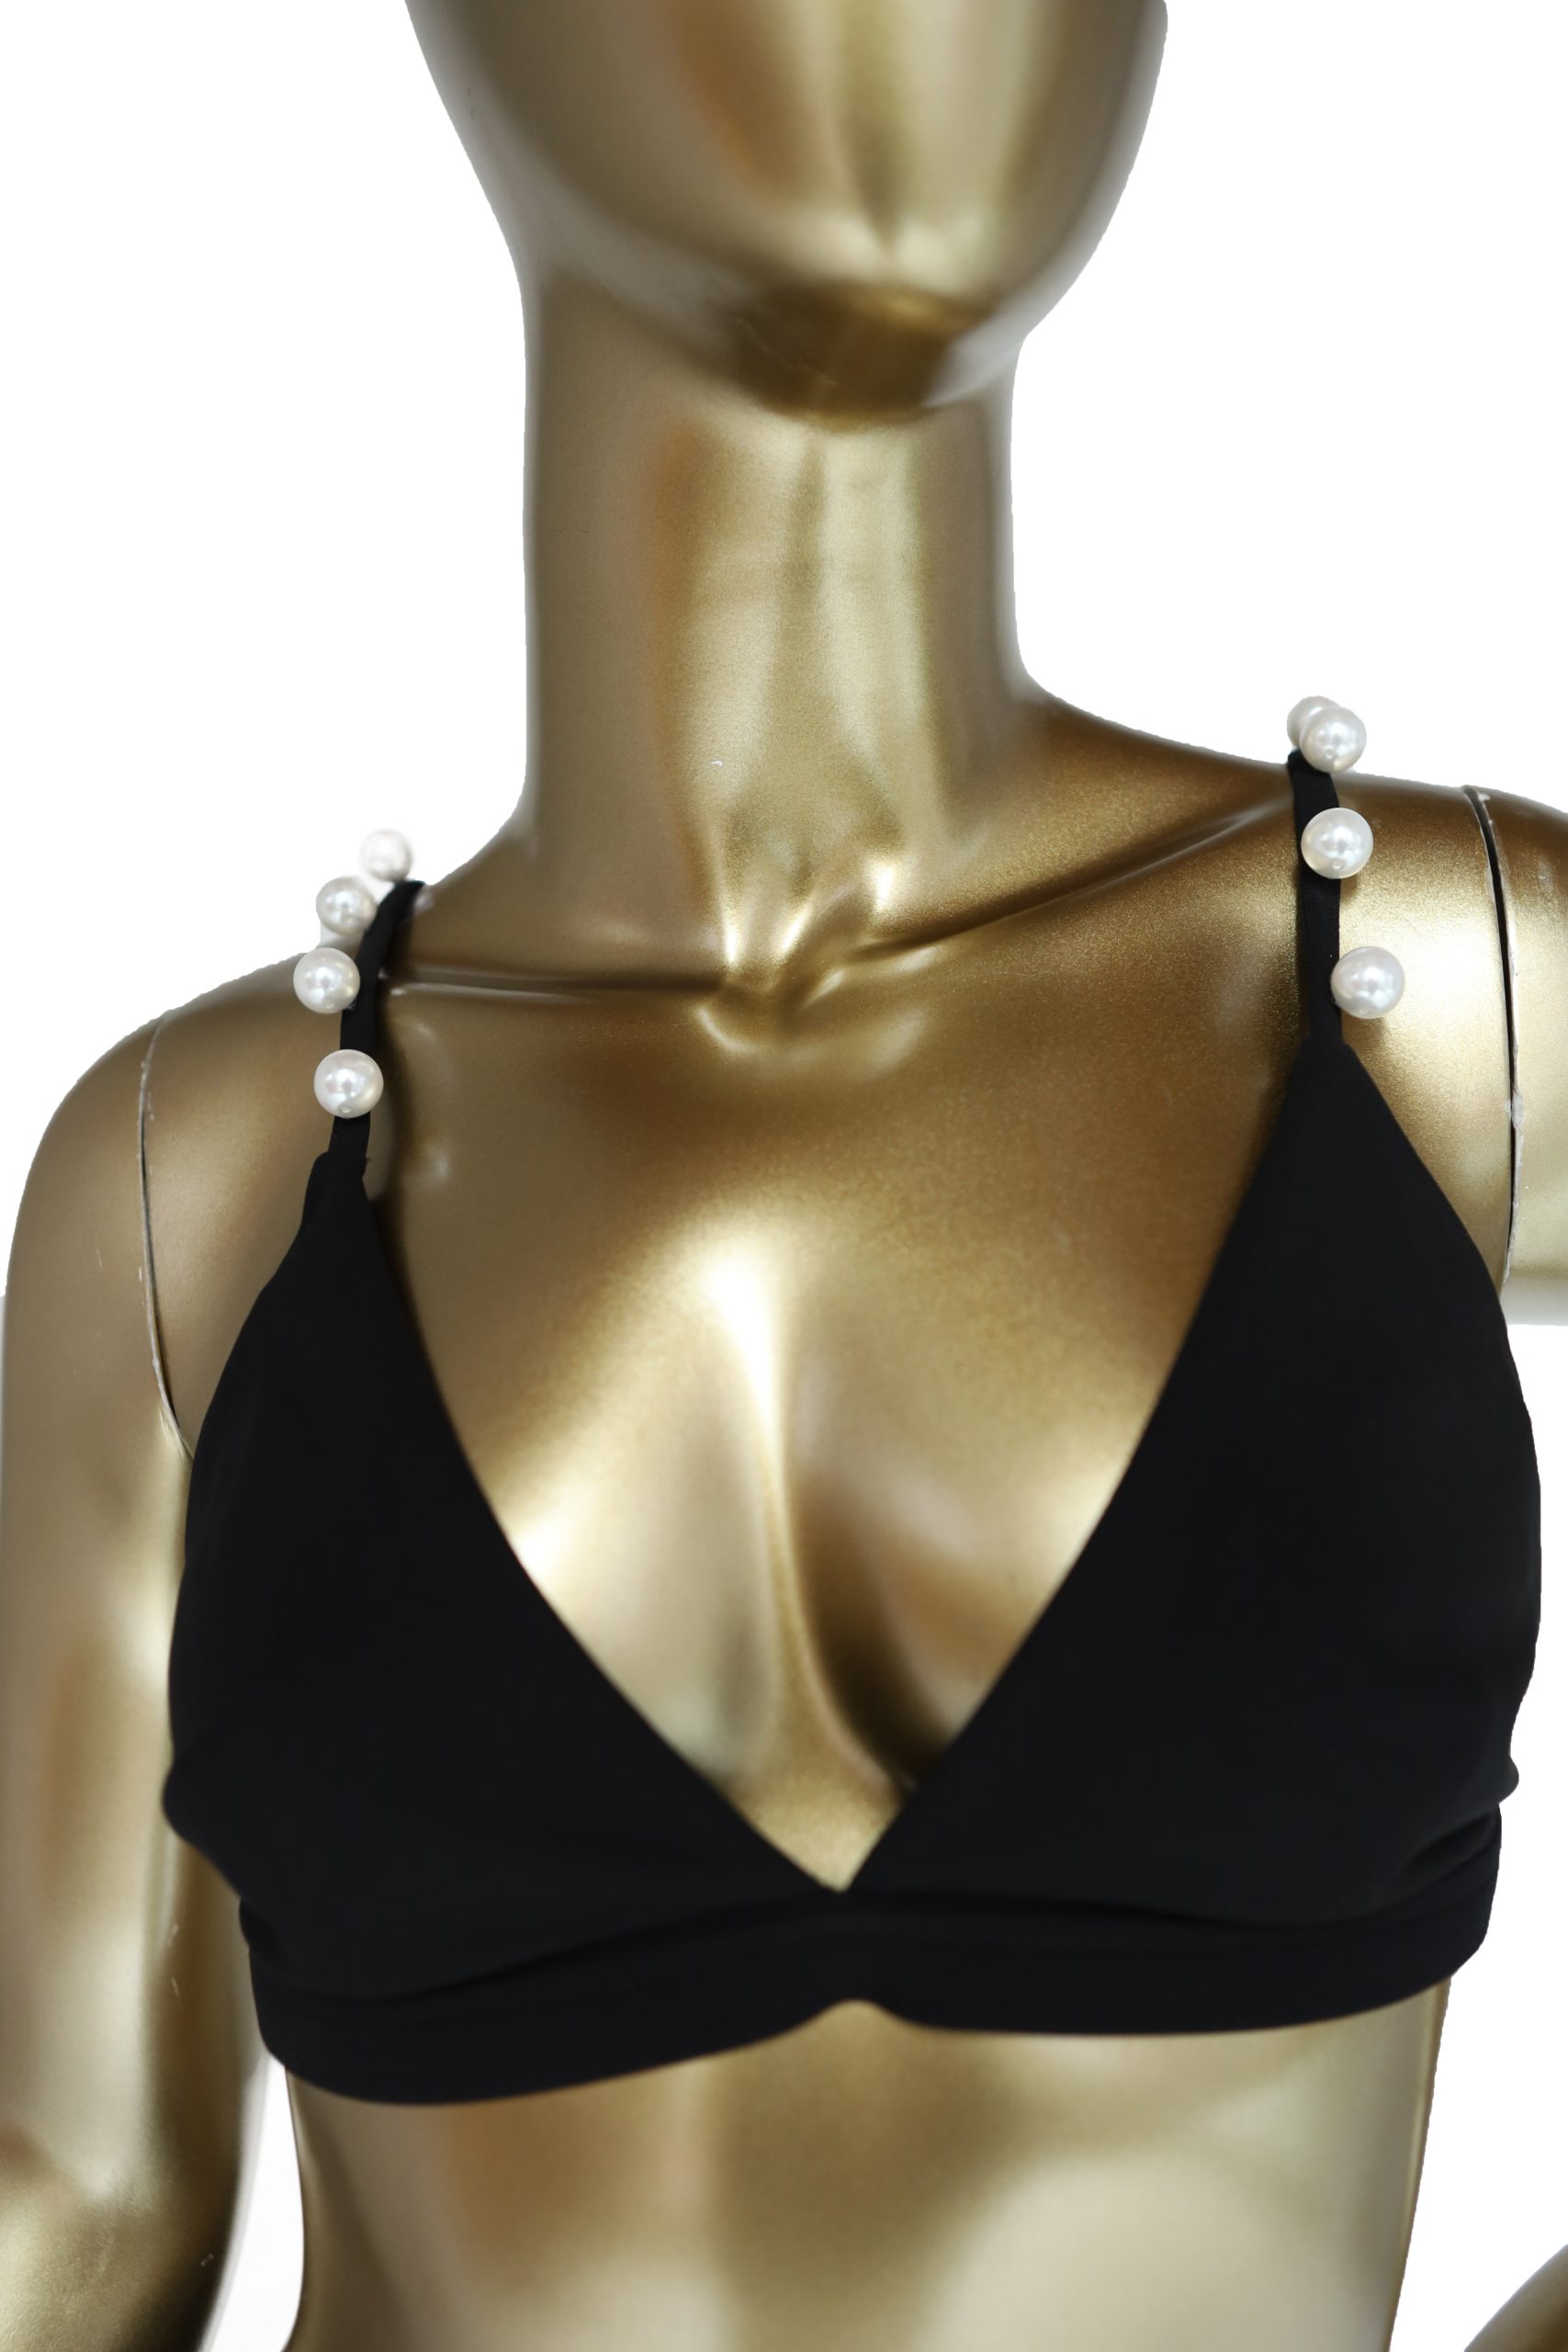 Givenchy Pearl Bralette Top - Janet Mandell